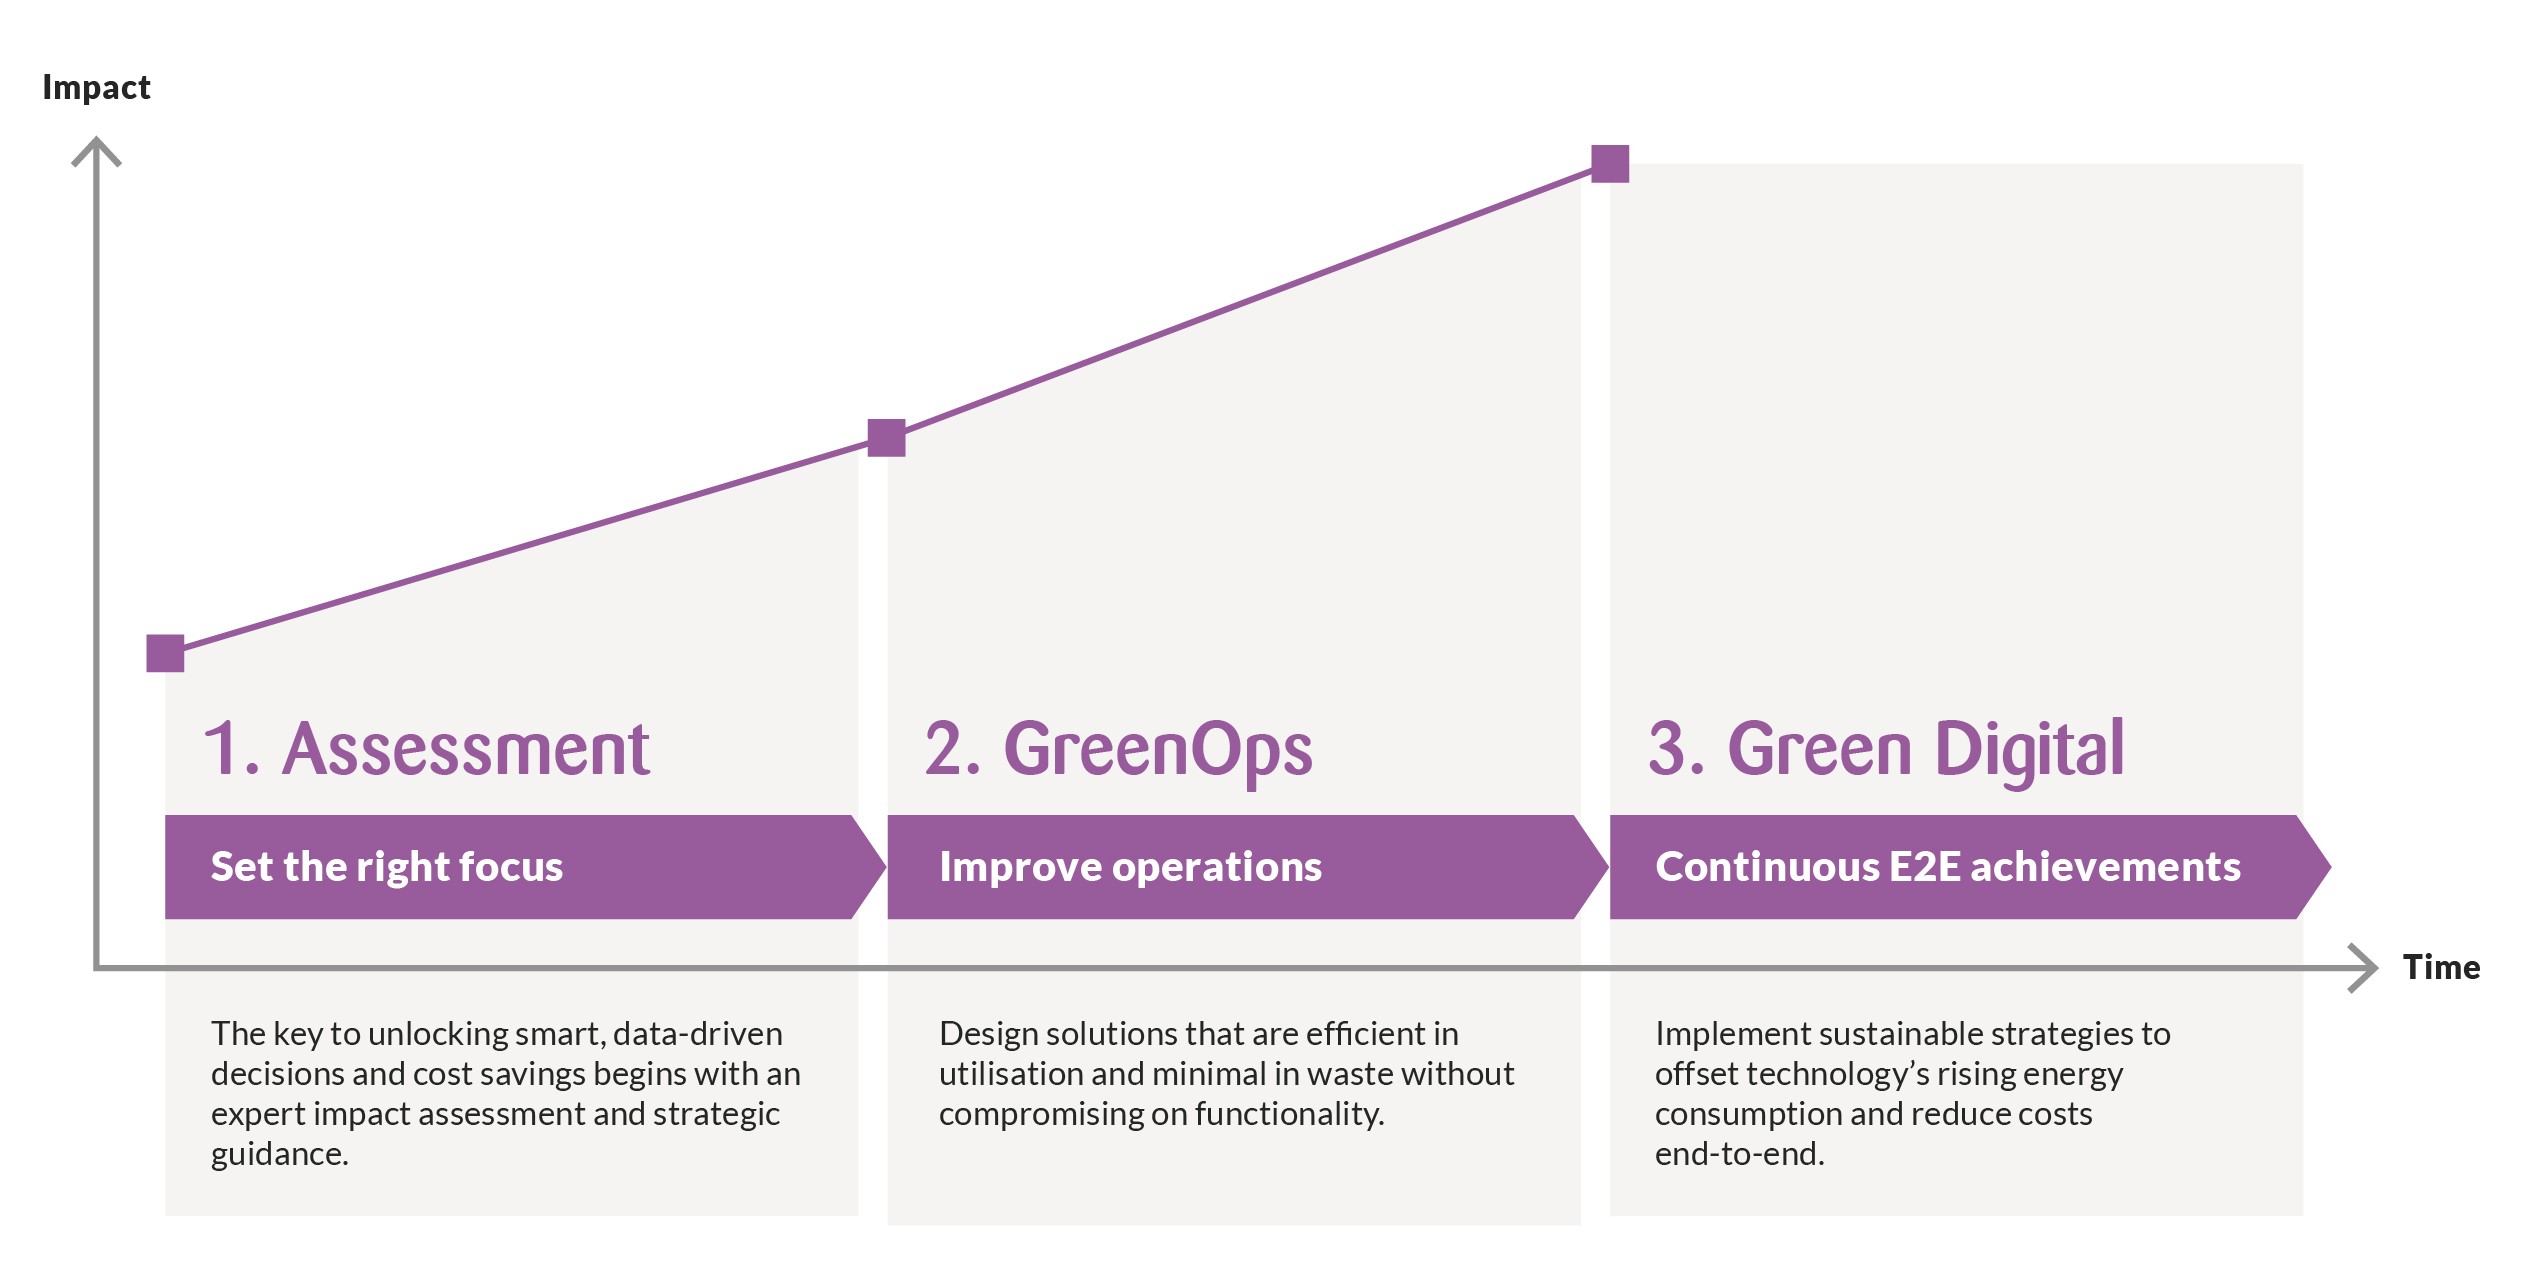 Graph depicting the three steps to achieving sustainable cost efficiencies in insurance: 1. Assessment (set the right focus), 2. GreenOps (improve operations), and 3. Green Digital (continuous end-to-end achievements), illustrating the impact over time.